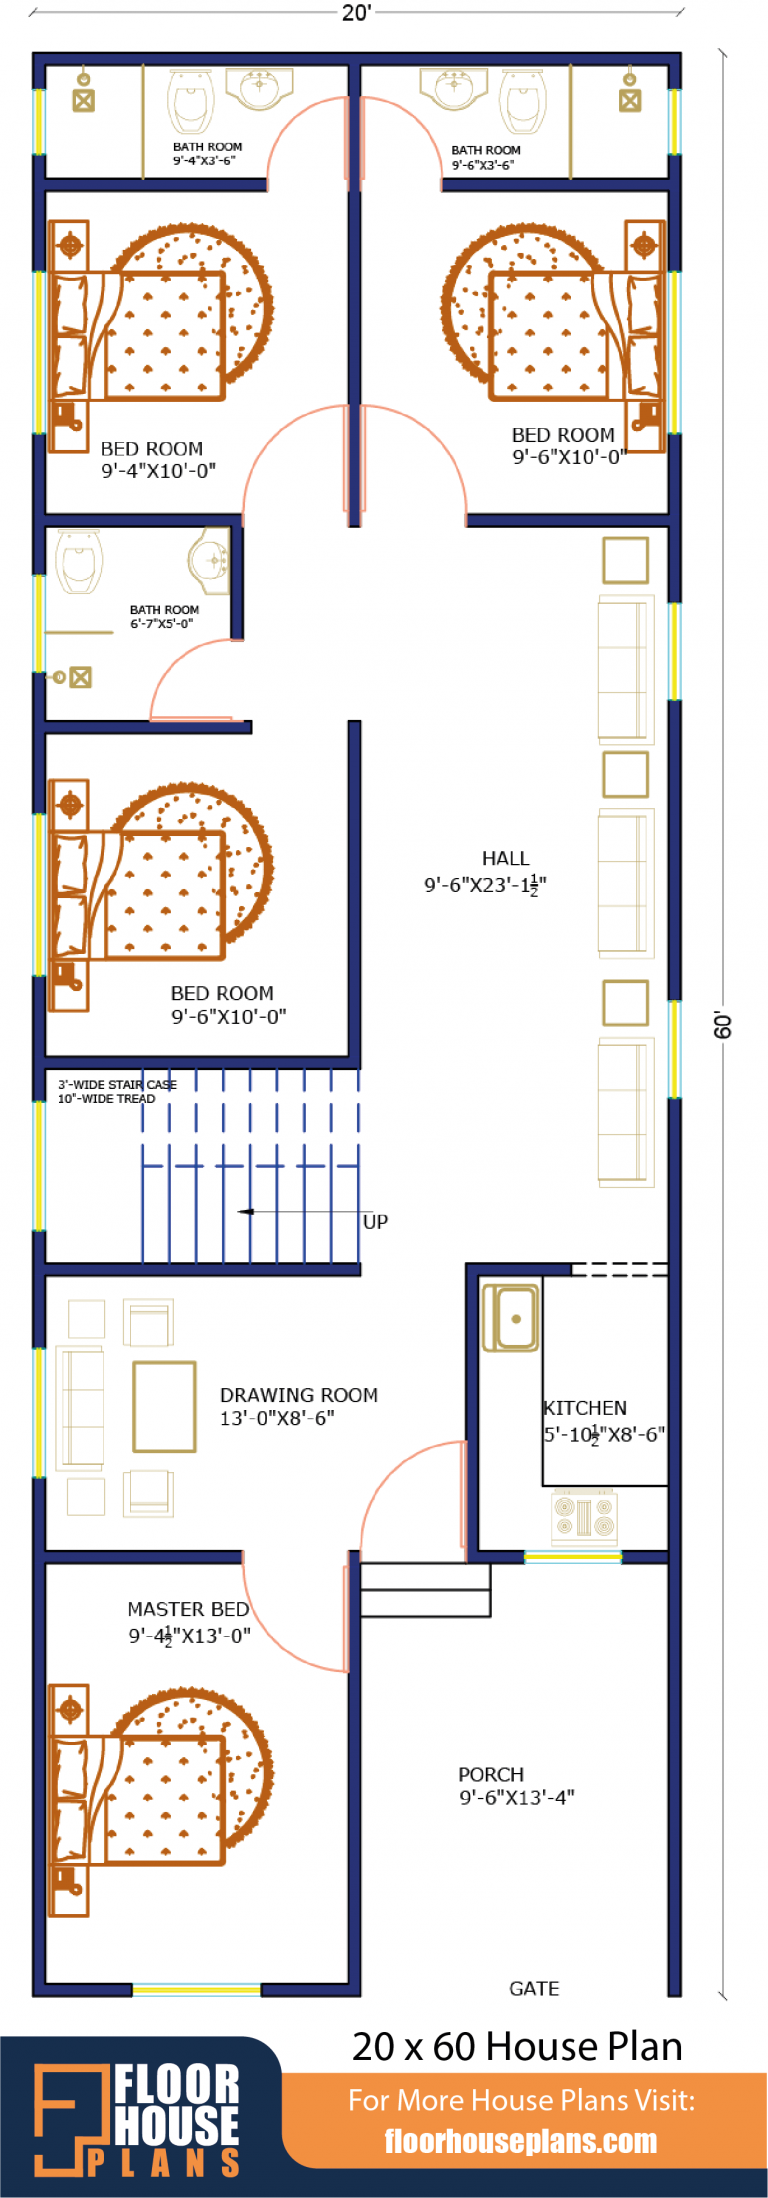 20 x 60 House Plan With Car Parking